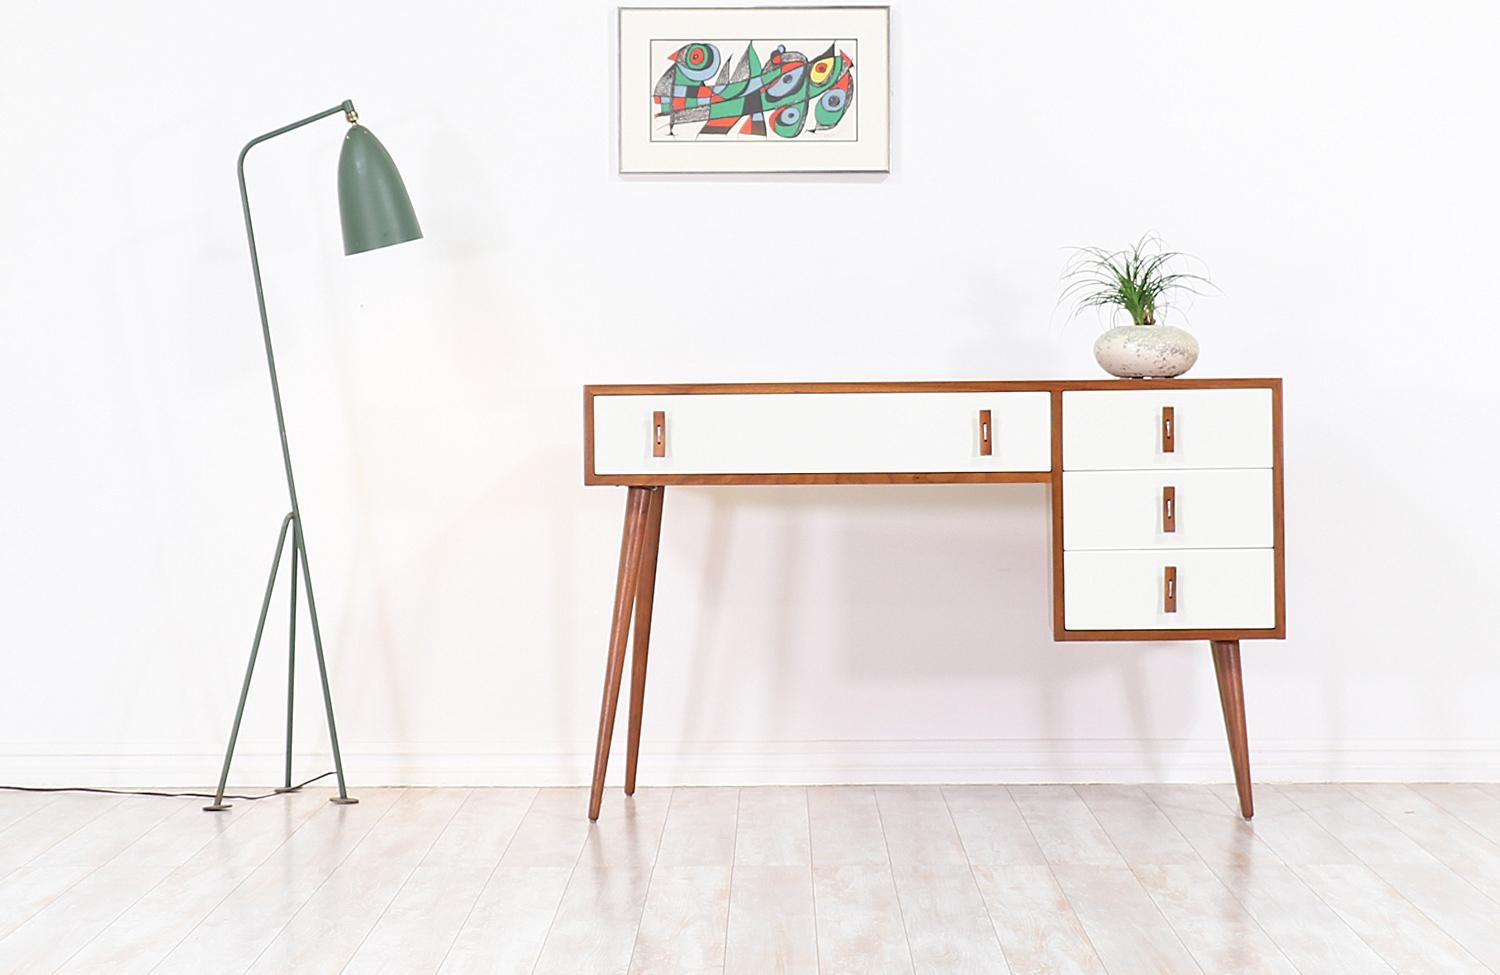 Stylish modern writing desk designed by Stanley Young for Glenn of California in the United States, circa 1950s. This striking design features a walnut wood frame sitting on angled tapered legs, with white lacquered front detailing and intricate